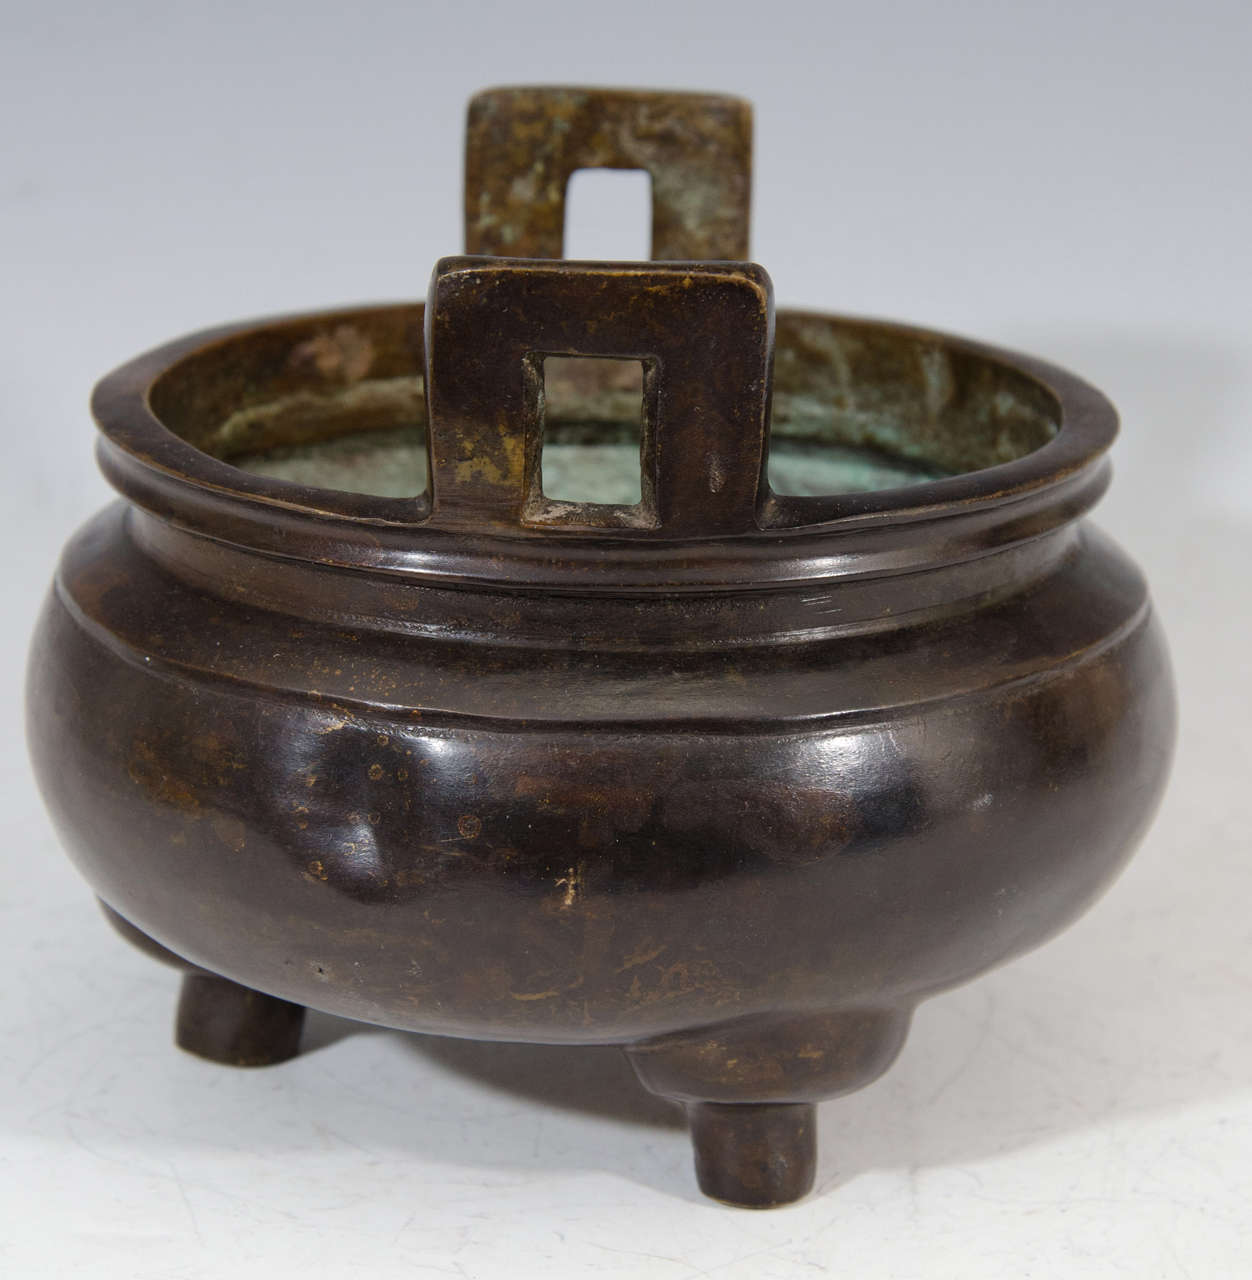 A Qing Dynasty heavy Chinese bronze incense burner with double handles, three feet, and a dark patina. The base is cast with a 16 character donation inscription for the 5th year of the Xuande Emperor (1426-1435), or 1430.

Good condition with age